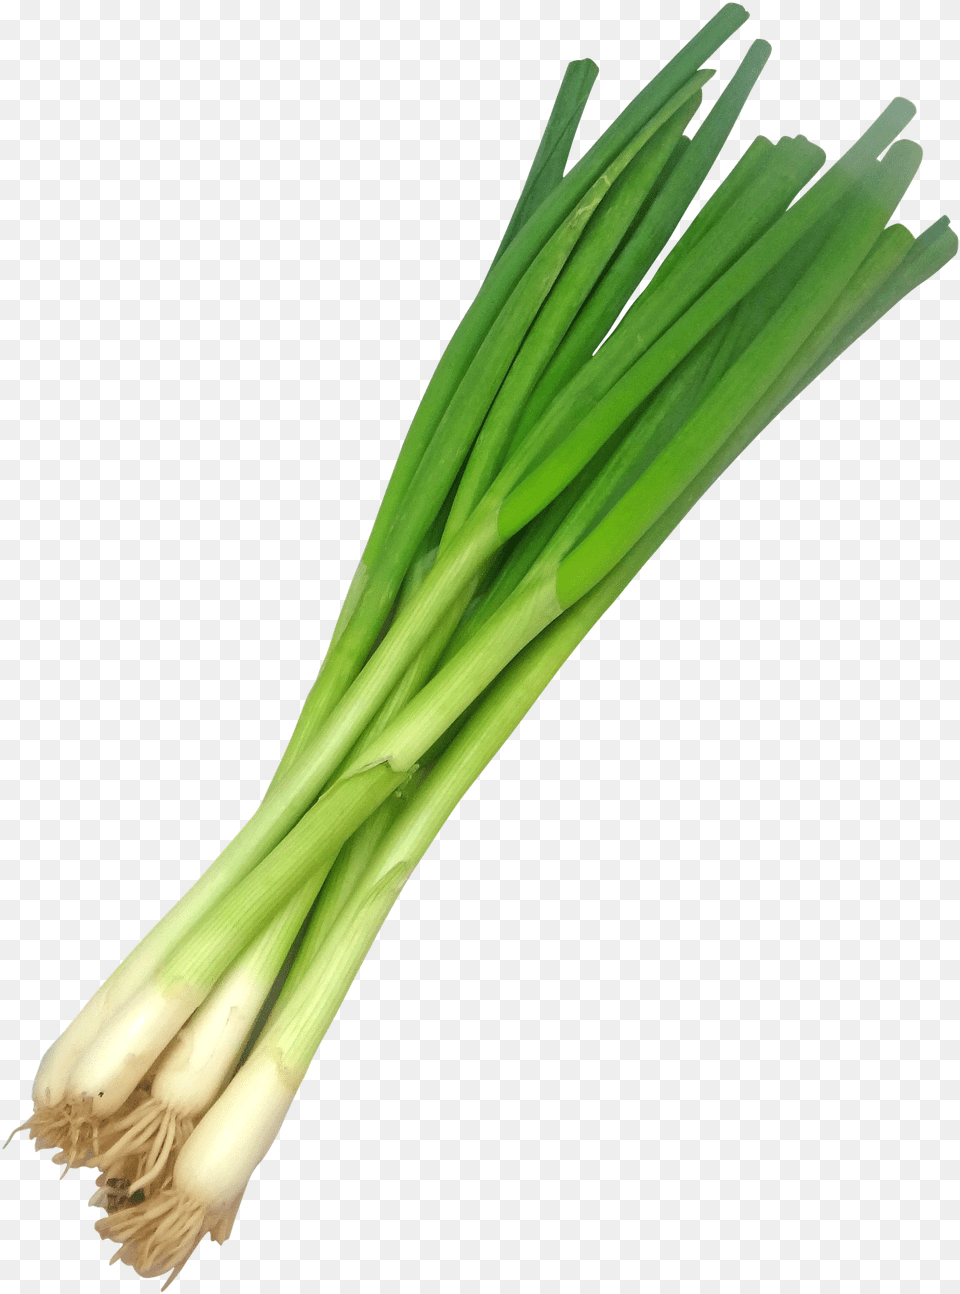 Spring Onions Transparent Background, Food, Plant, Produce, Spring Onion Png